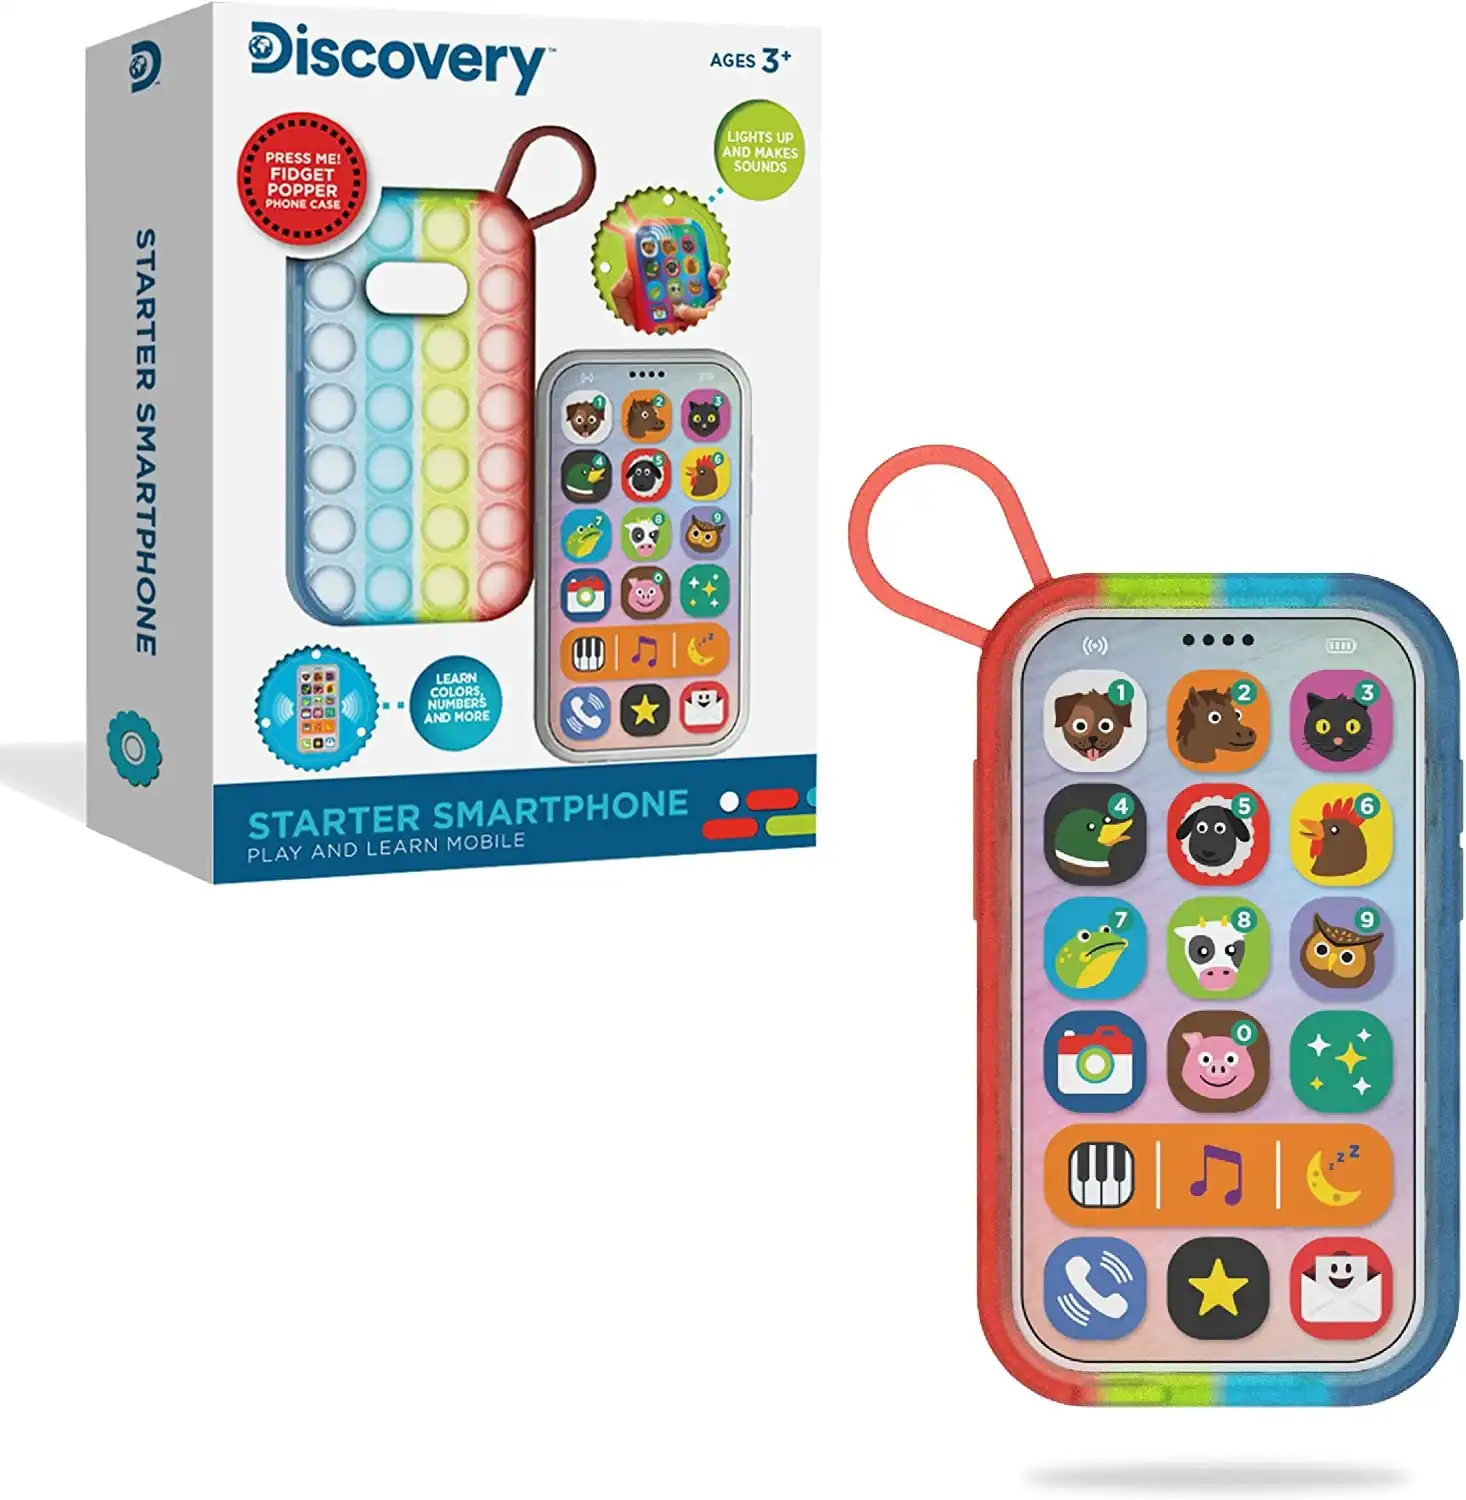 Discovery Starter Smartphone